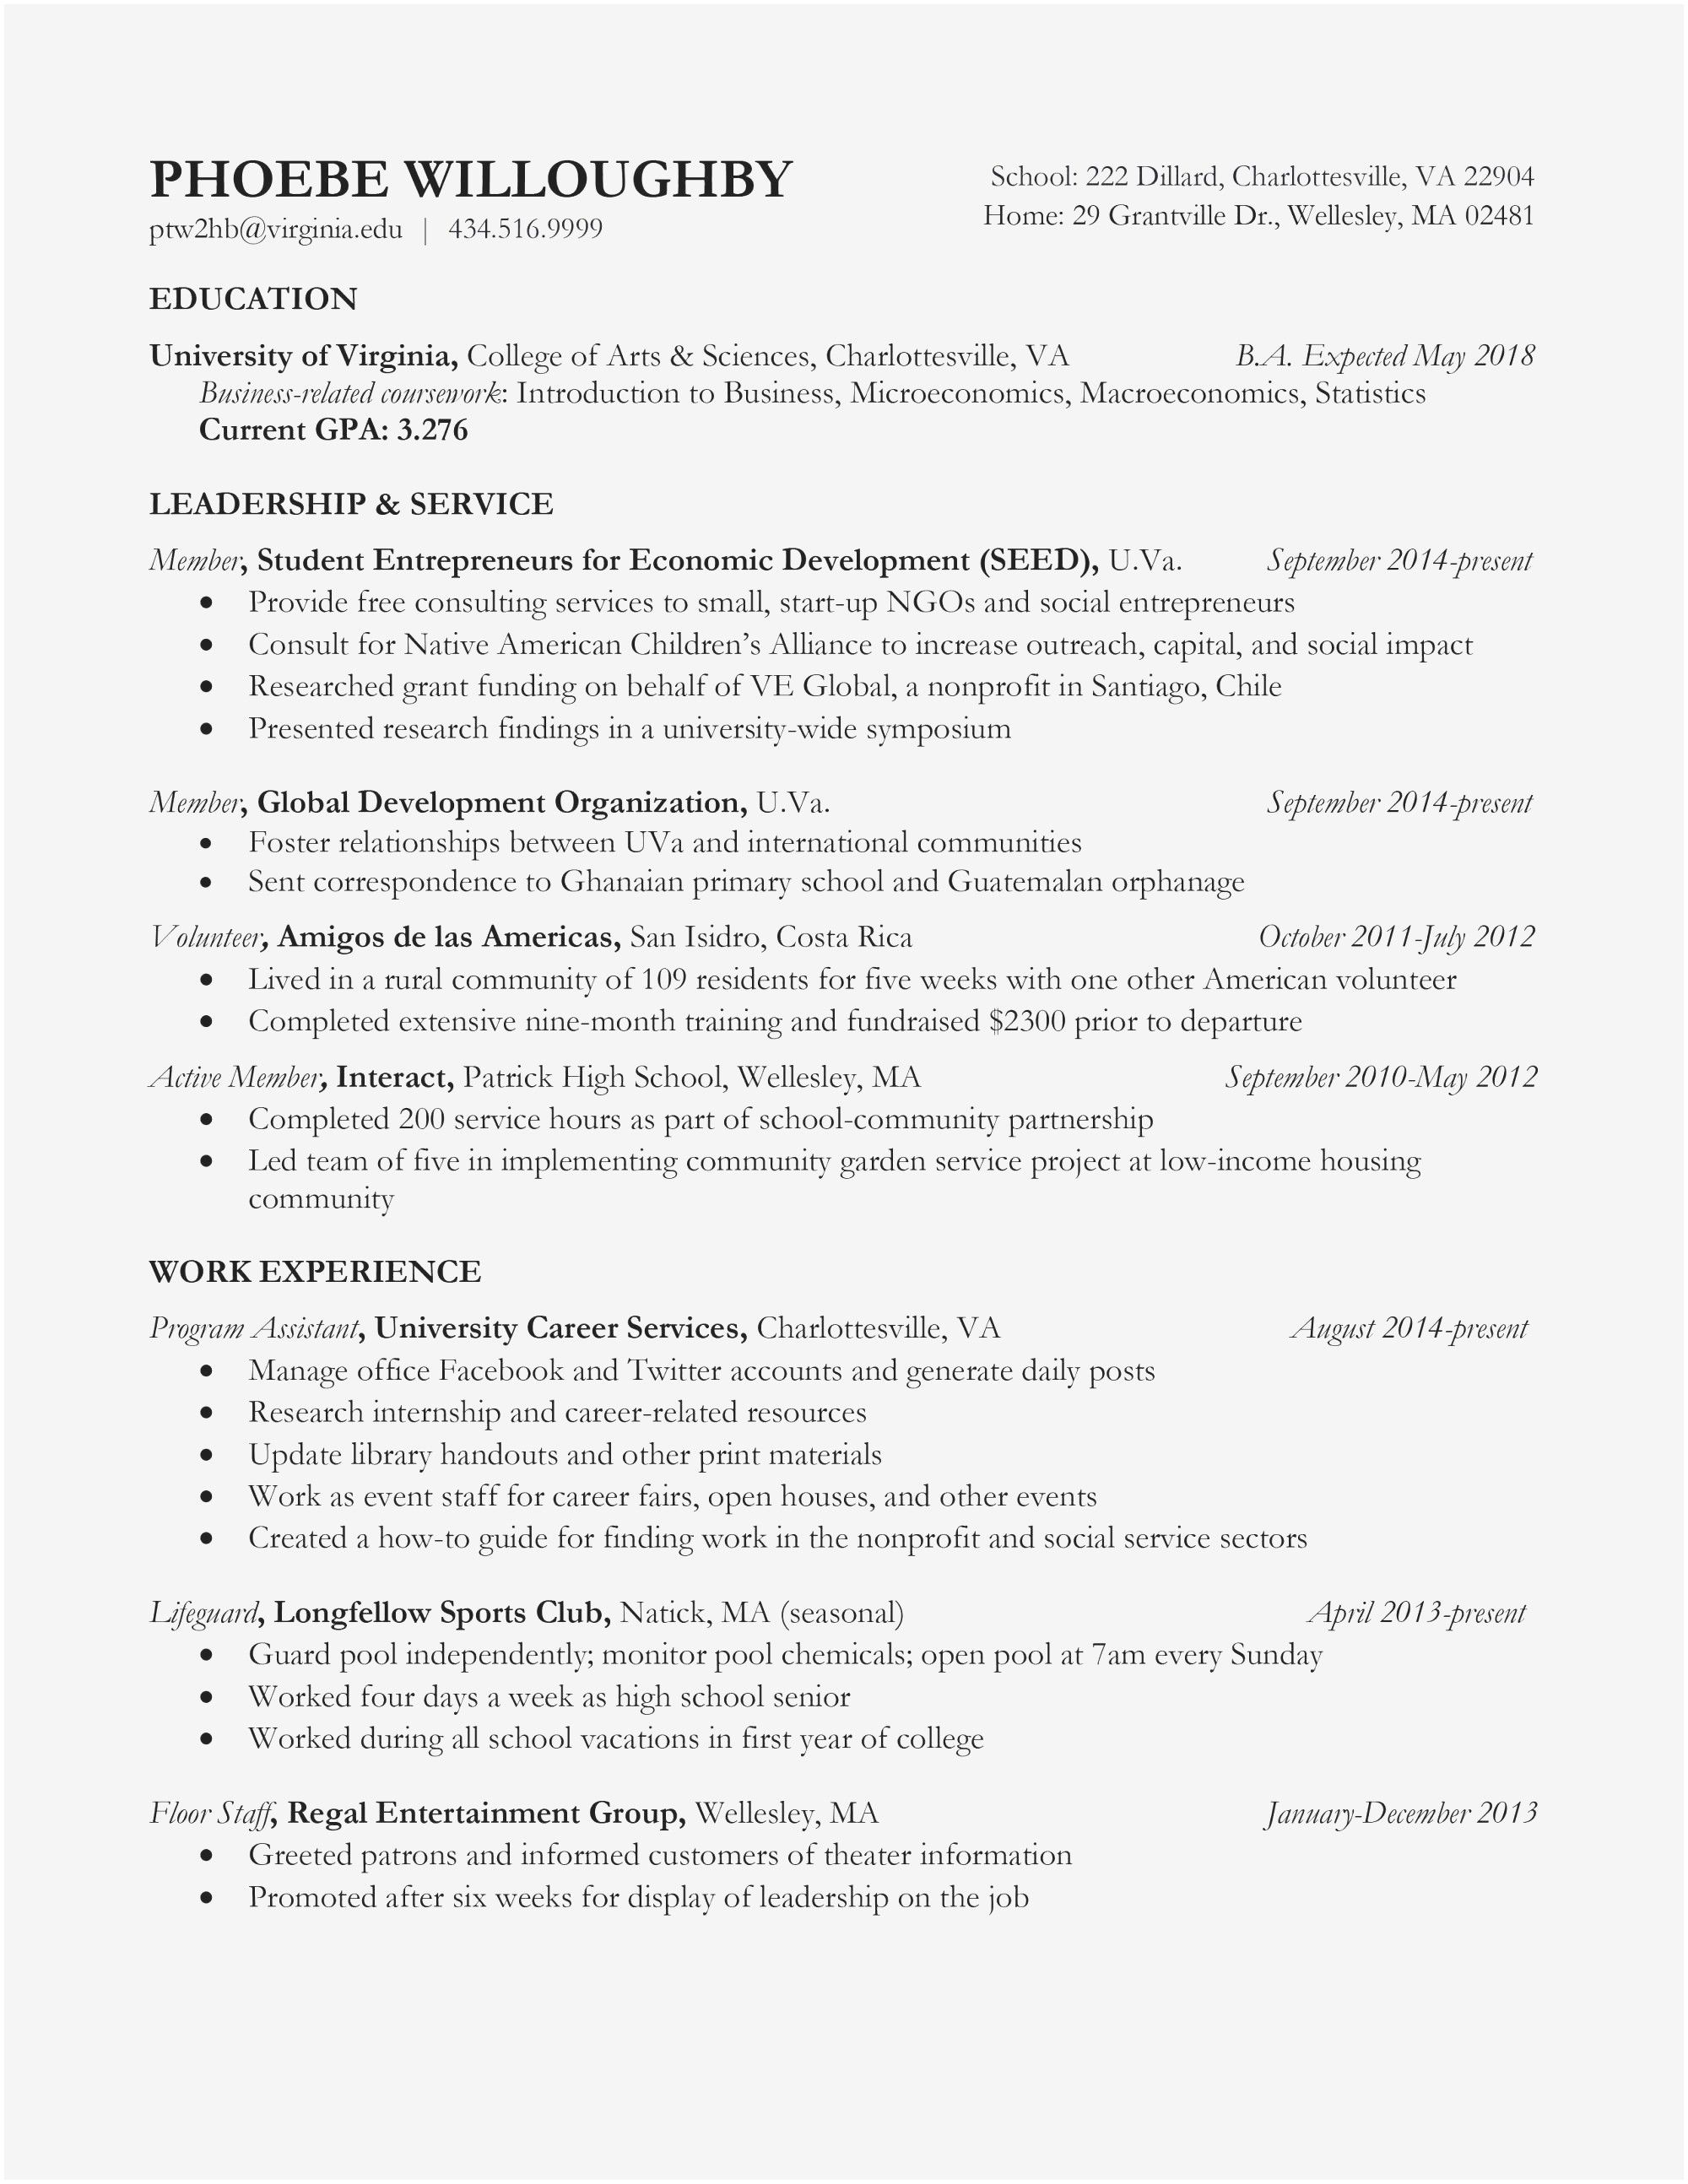 Chef Resume Samples Awesome Retail Resume 0d Archives Luxus Sample Resume For Director Operations